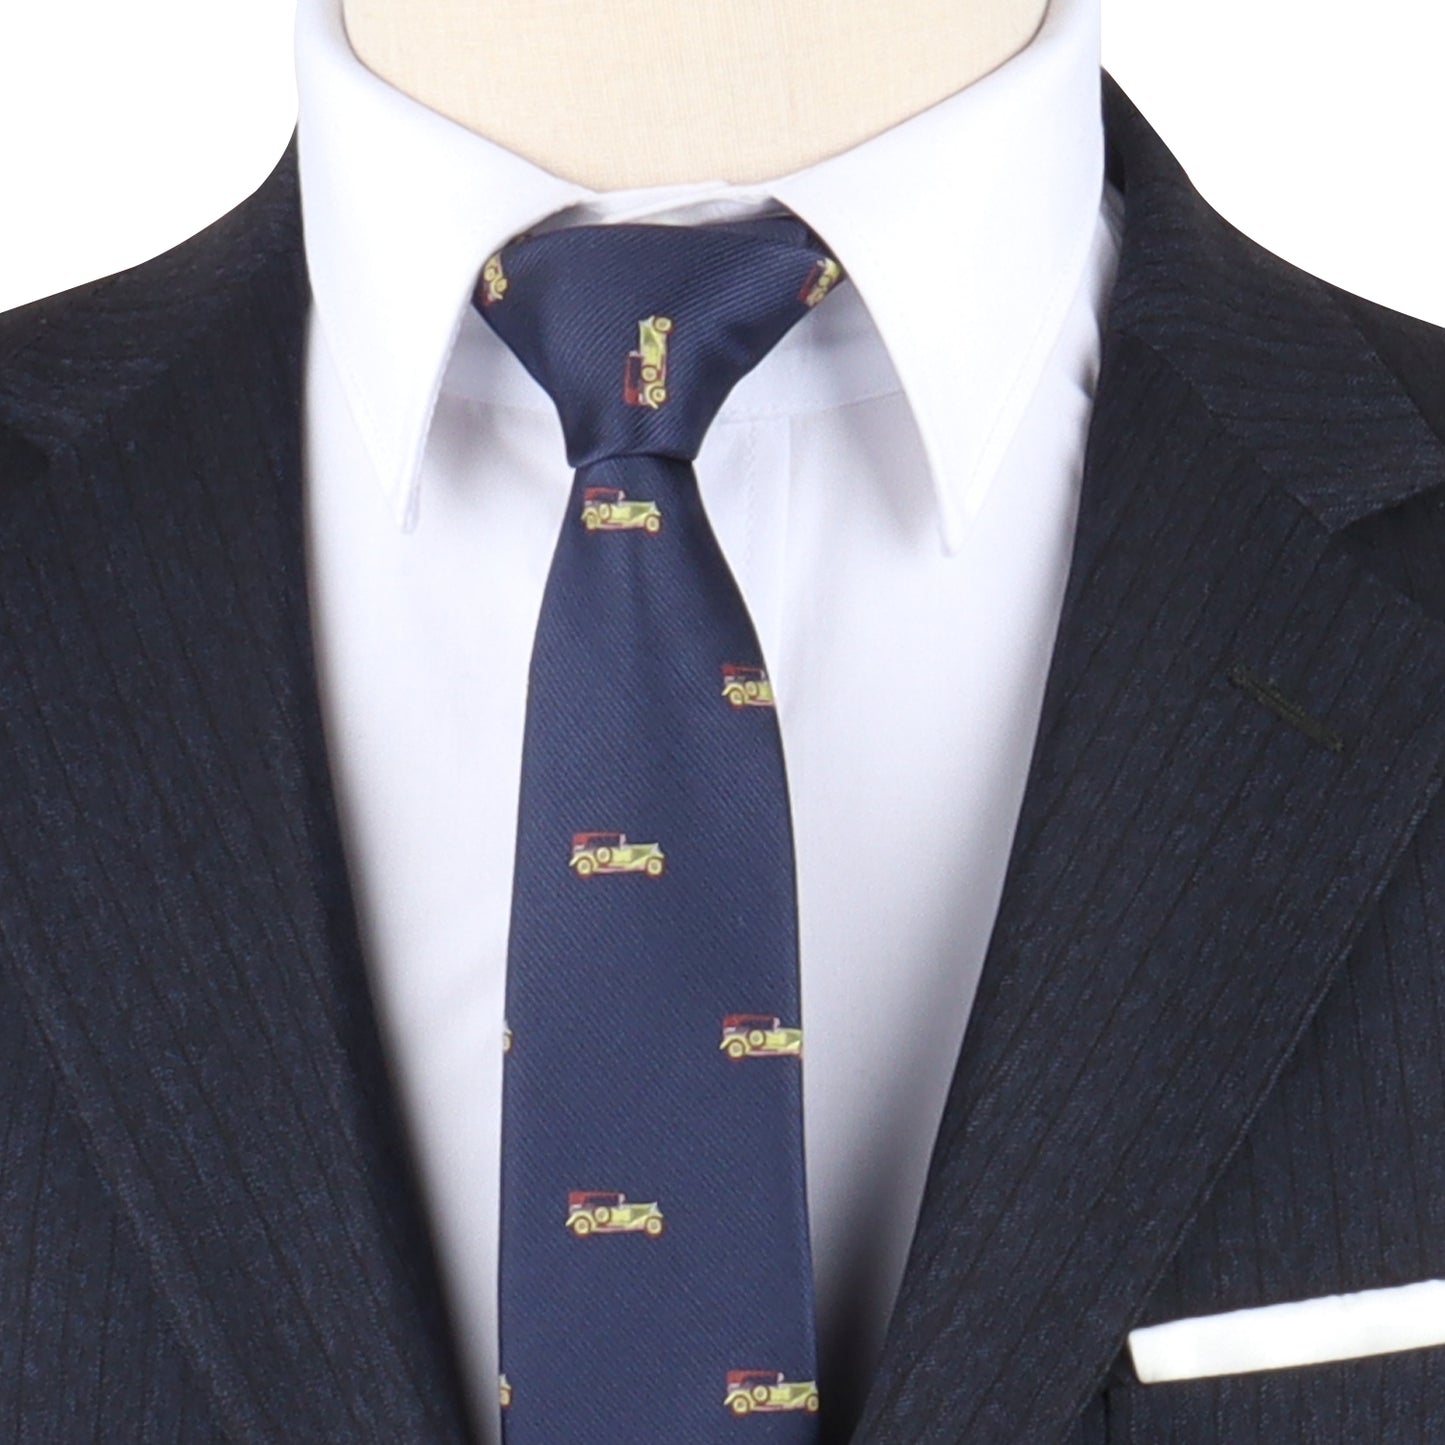 A vintage Classic Car Skinny Tie mannequin revved up in a suit and tie.